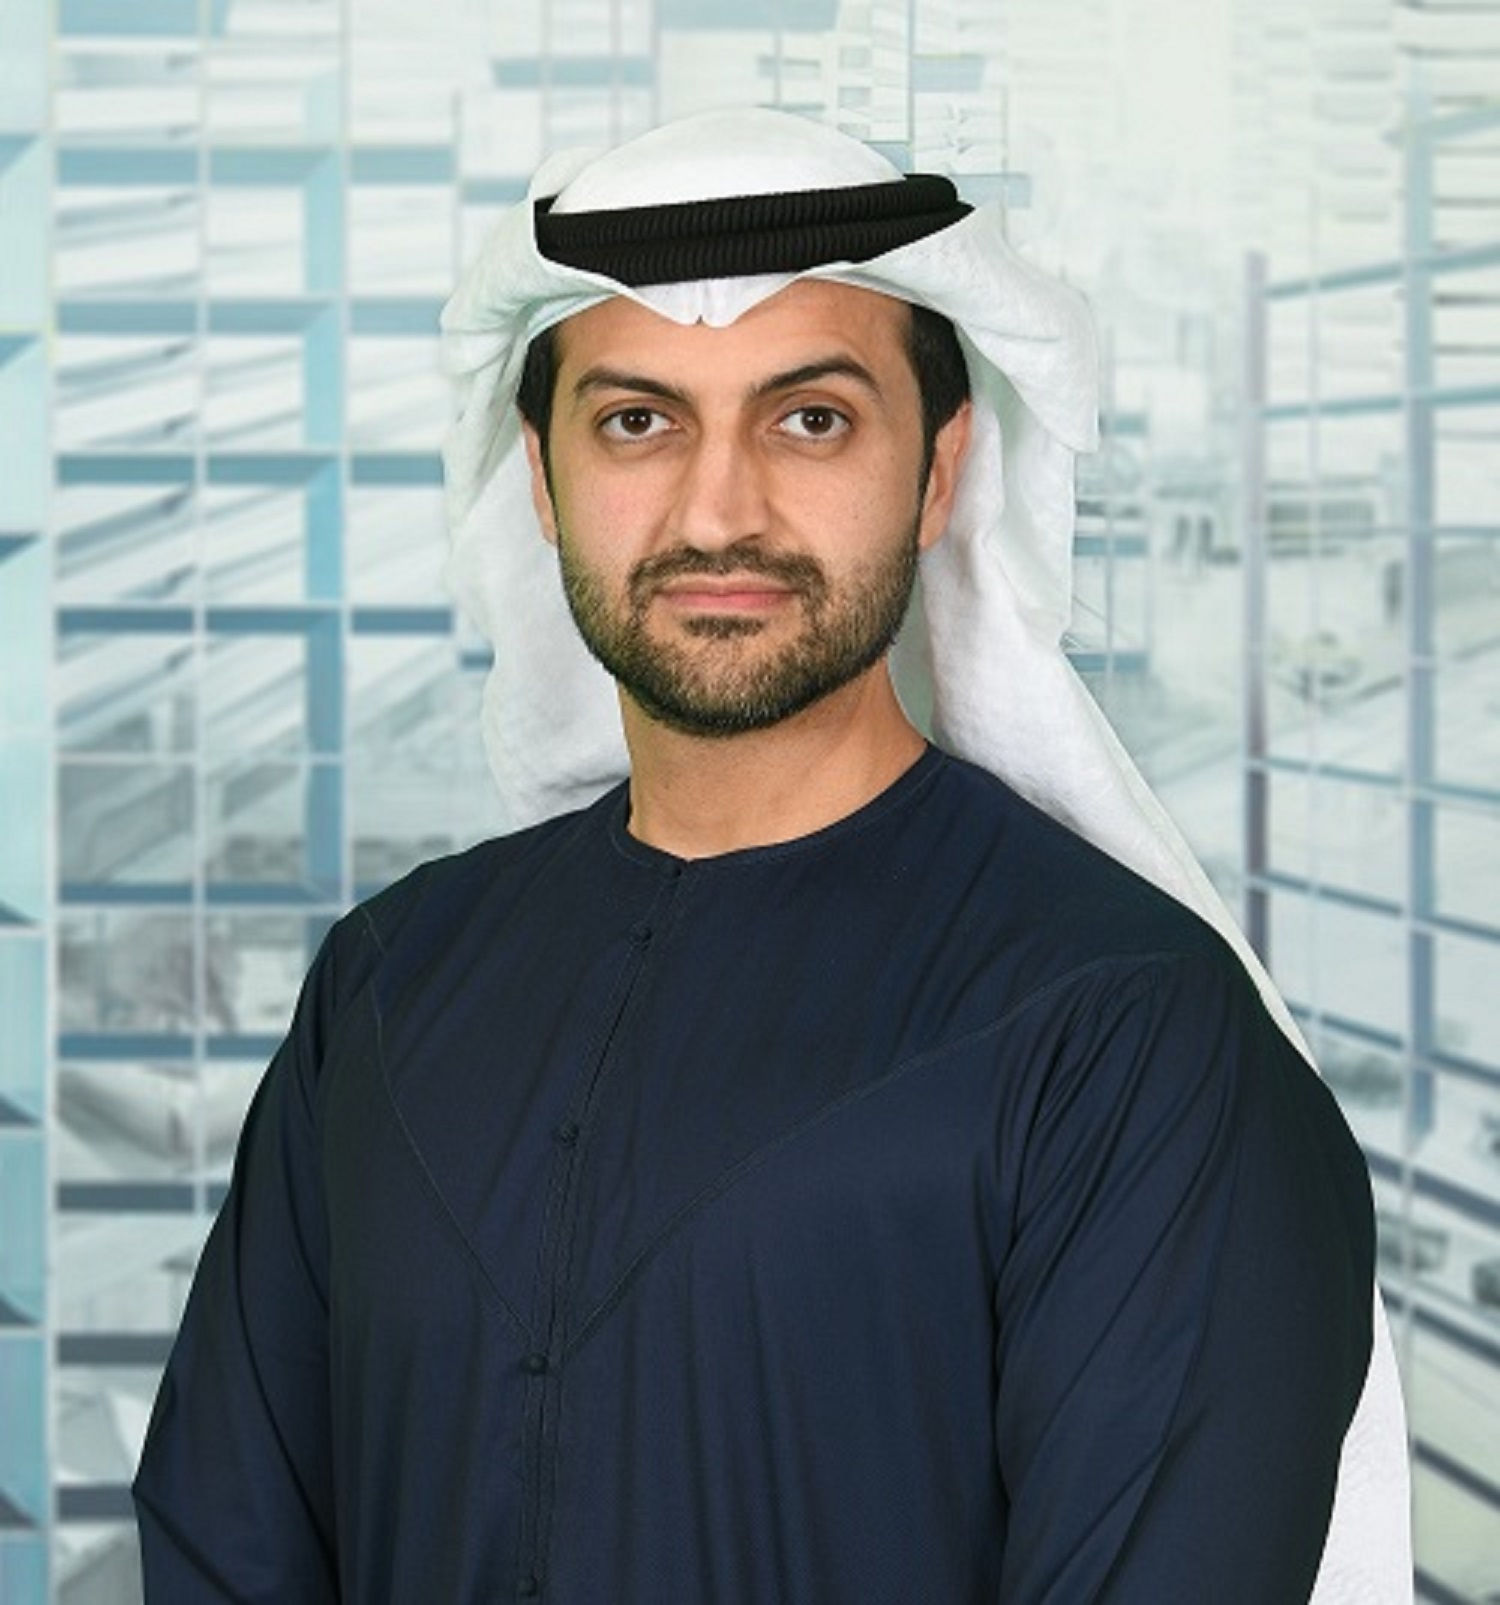 Eshraq Investments Records Q2 2020 Net Profit Of AED 20.45 Million; Announces Comprehensive Investment Strategy And Targets Major Share Buyback